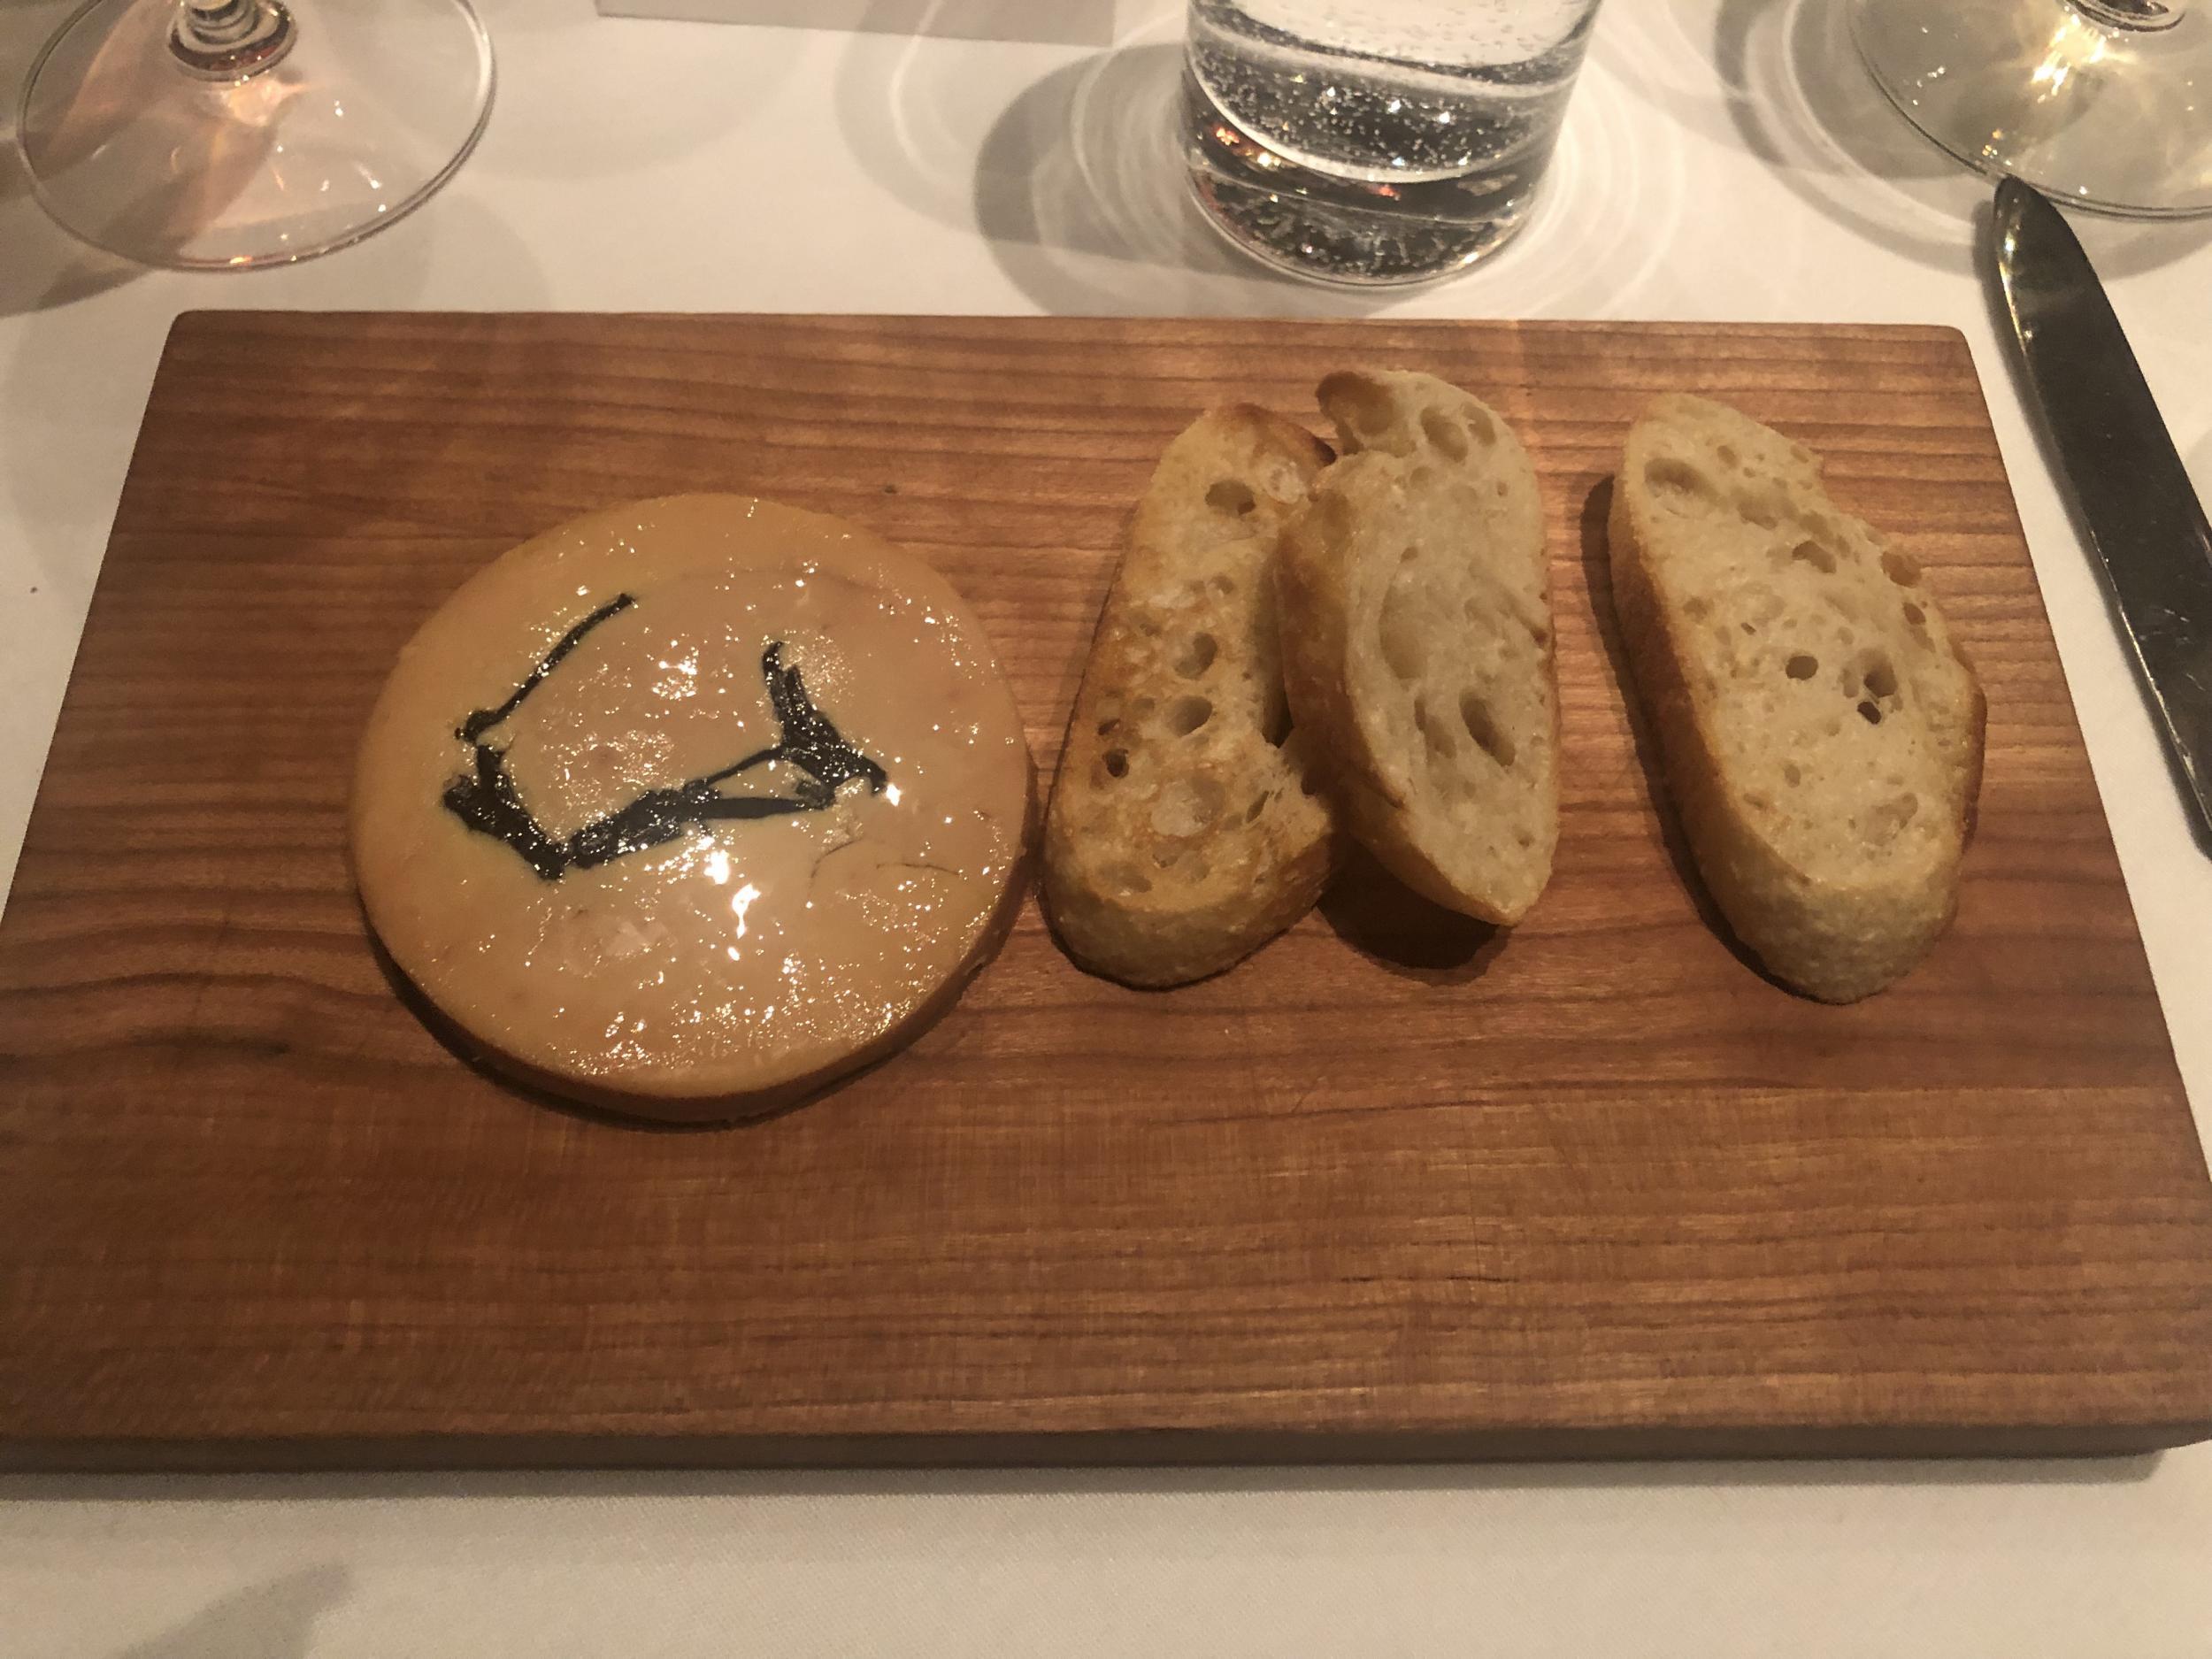 Foie gras was on the menu during the preview dinner